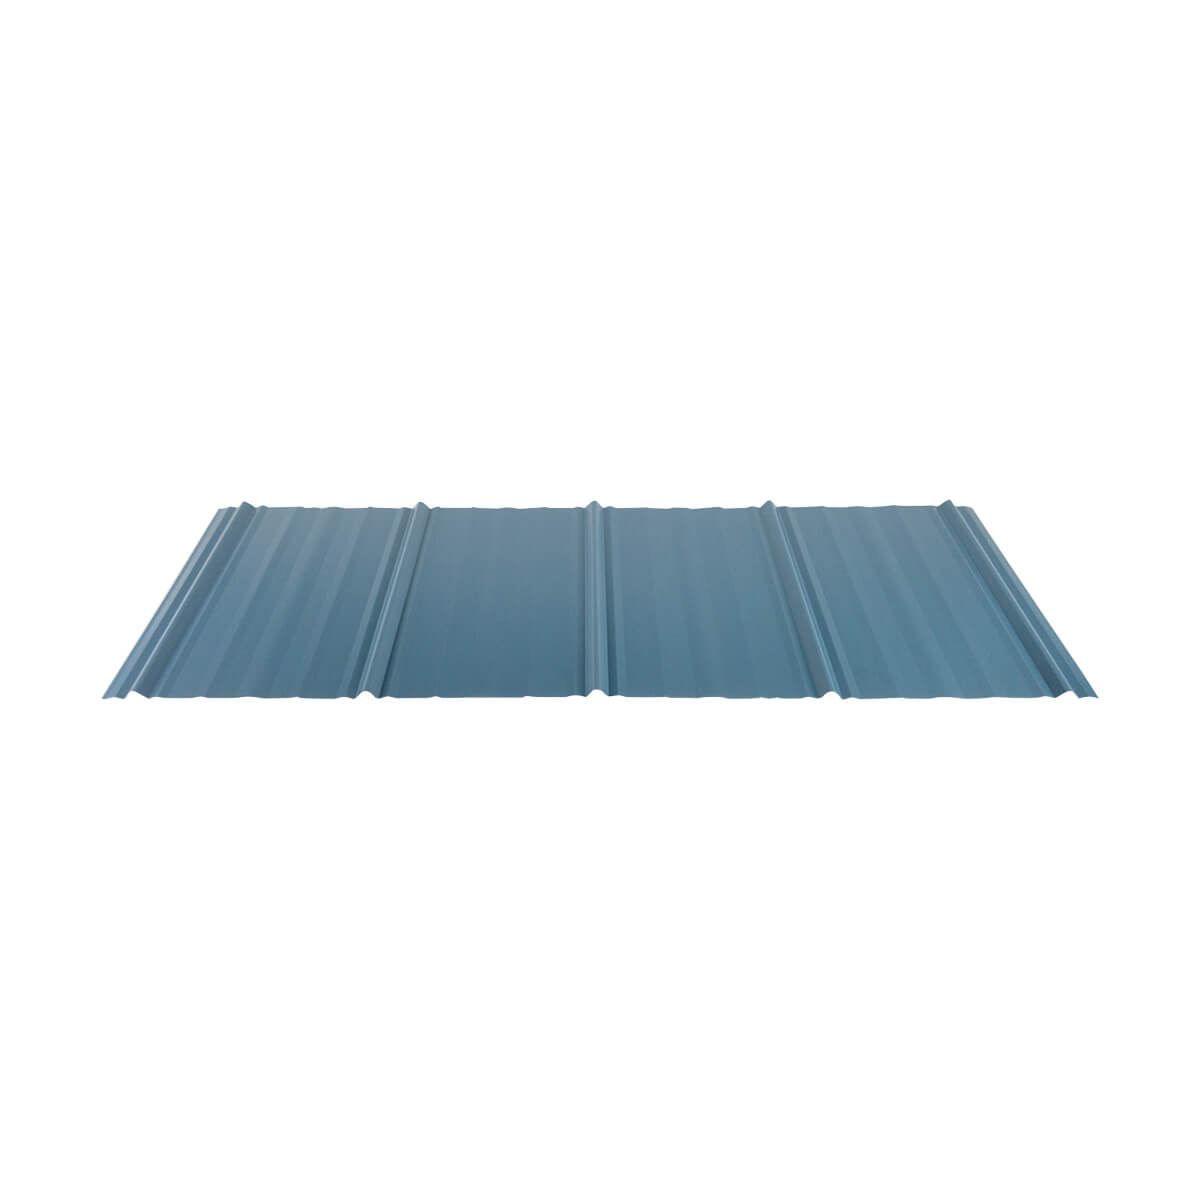 WeatherShield 1 Metal Sheets or Panels - 32-in x 8-ft